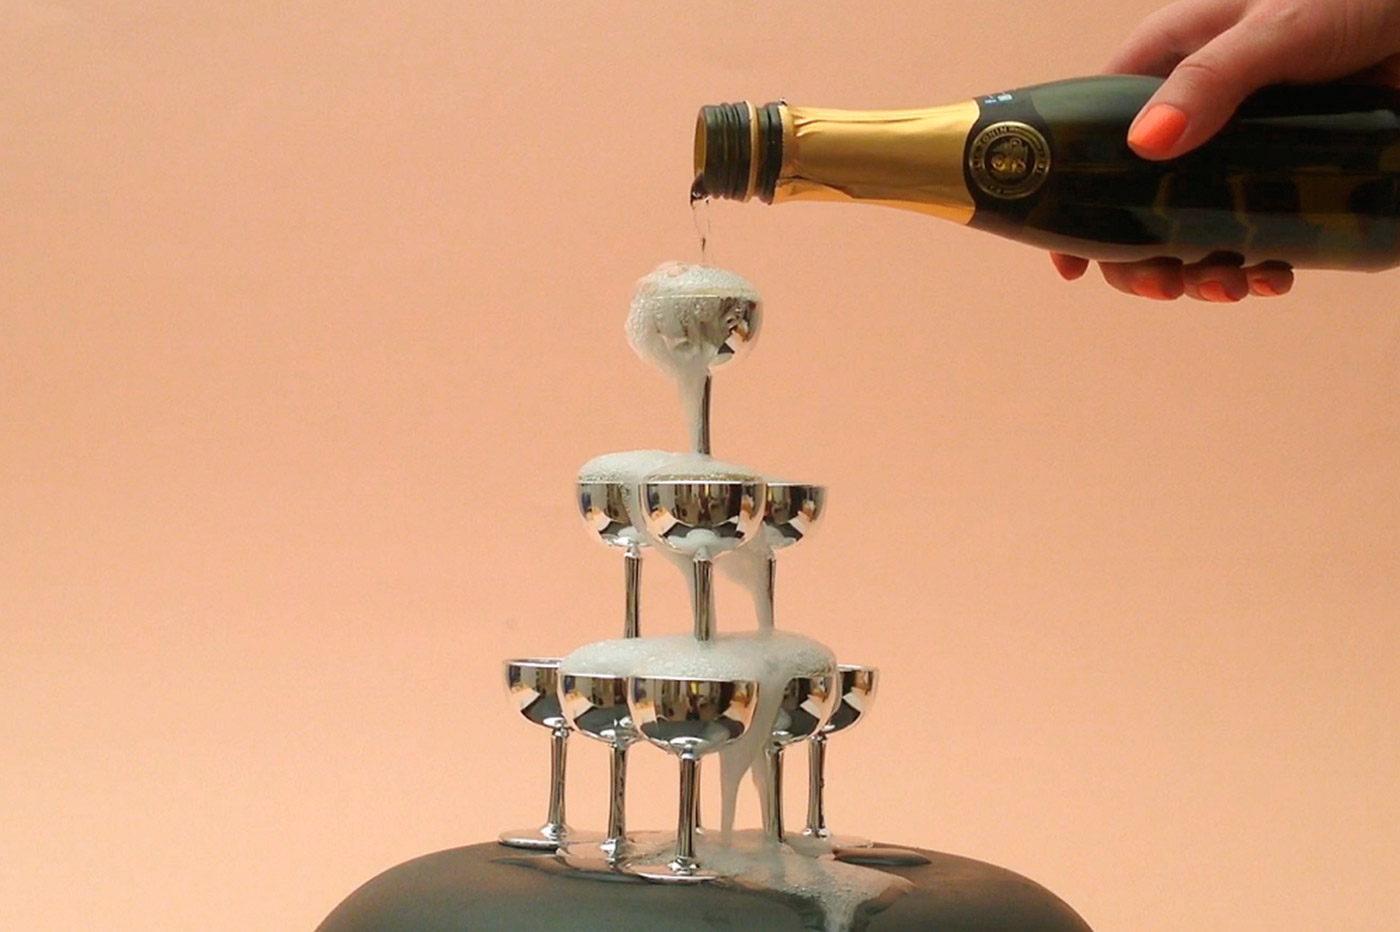 Champagne Pouring